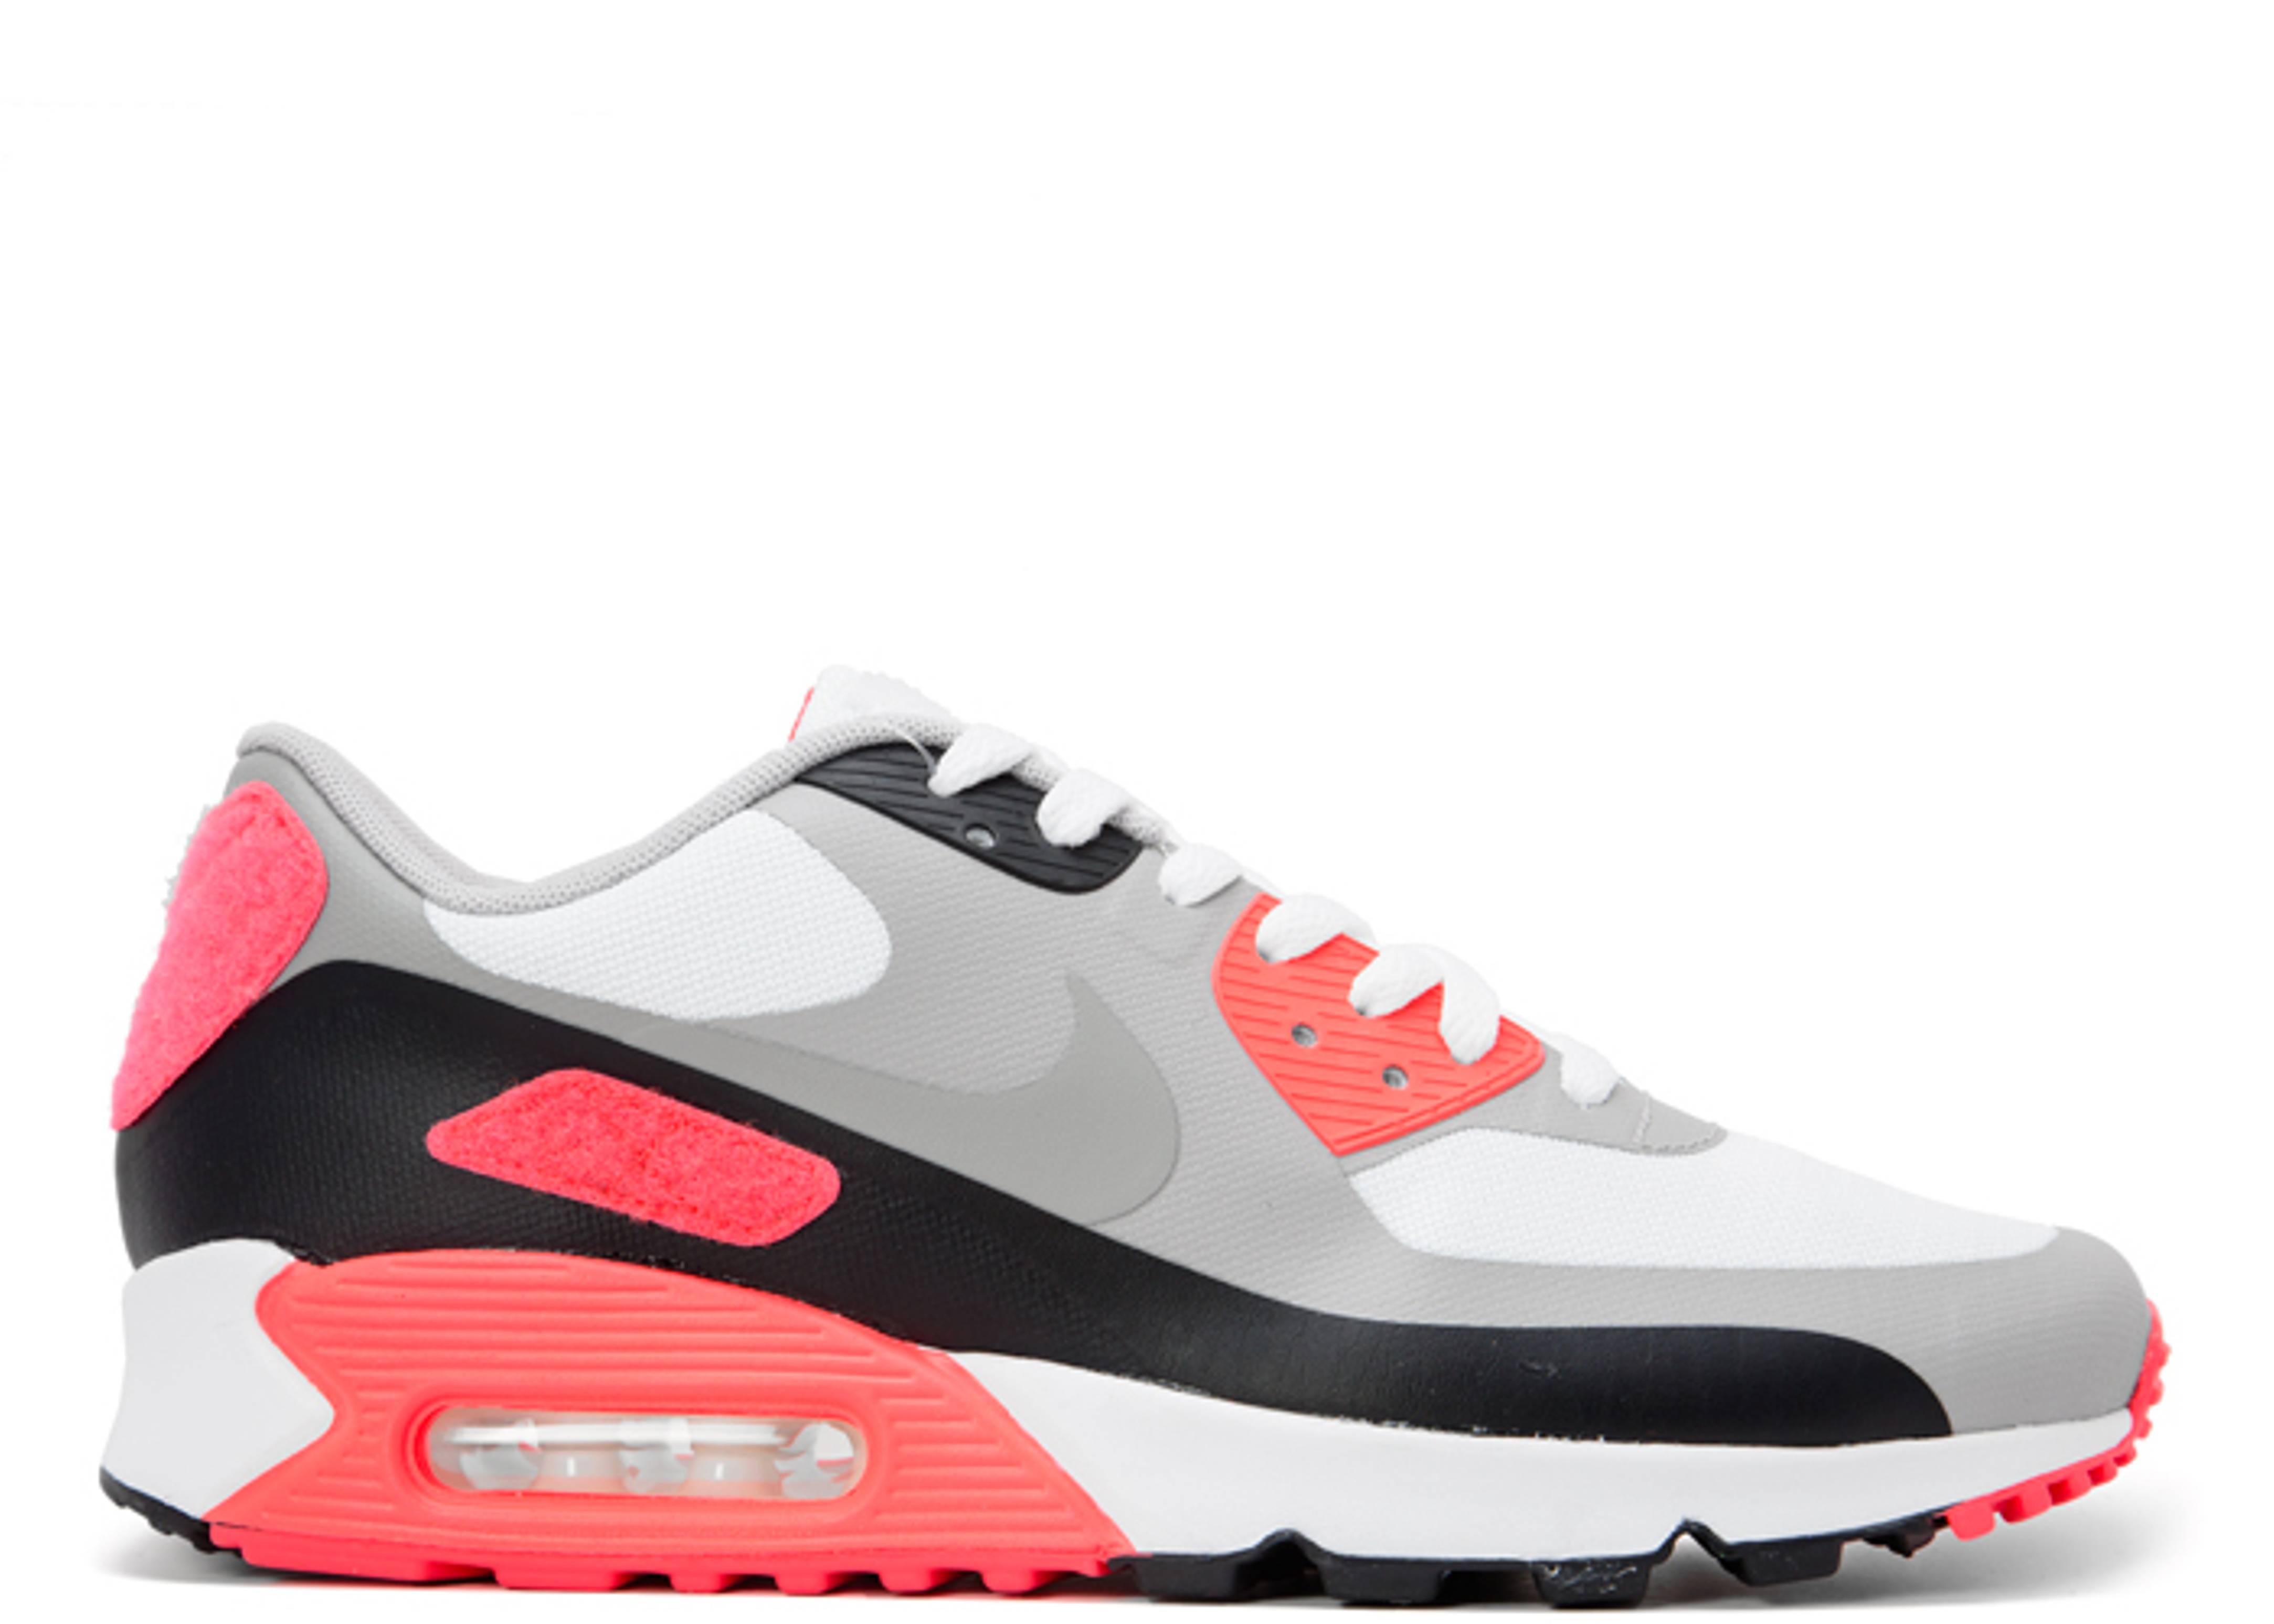 Air Max 90 SP Infrared 'Patch'